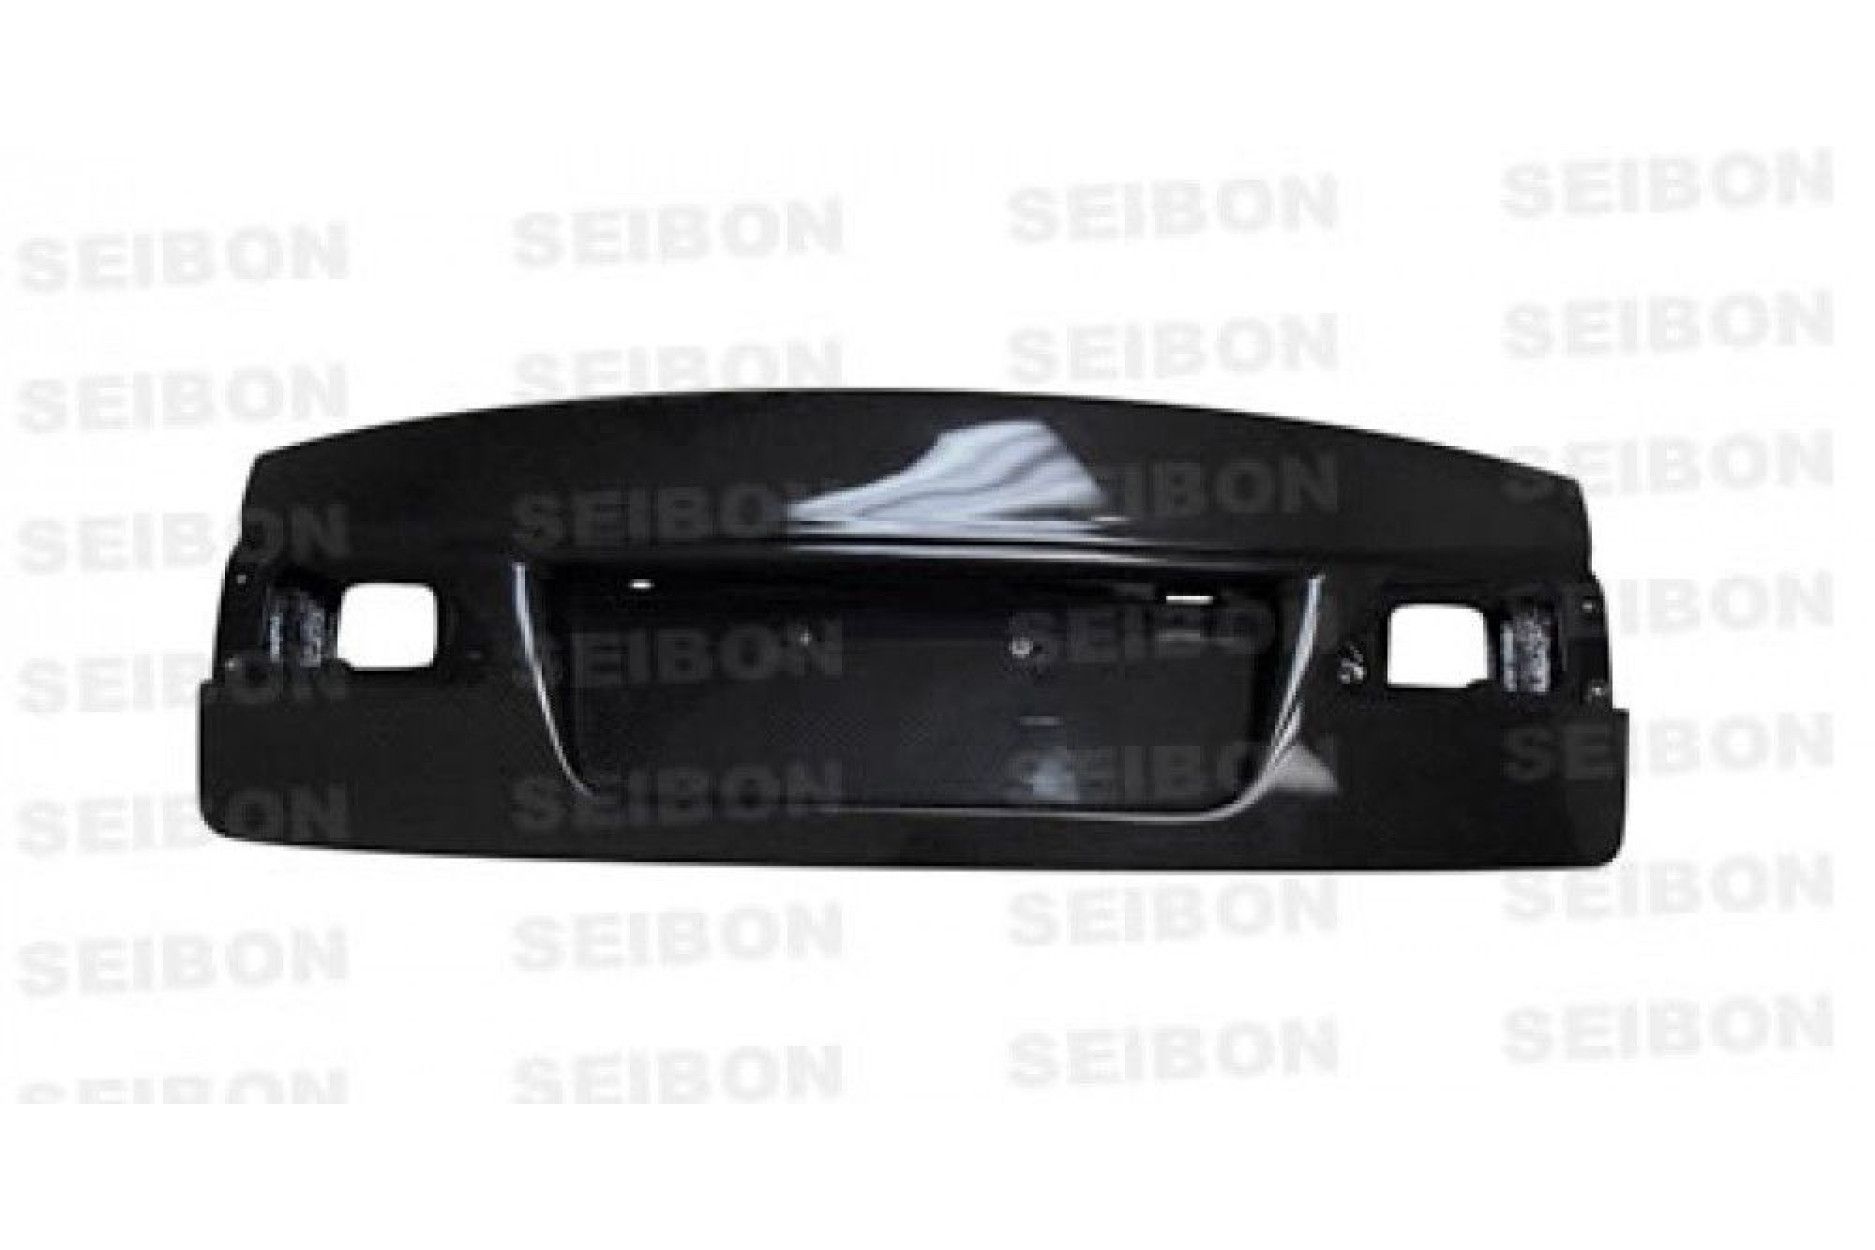 Seibon carbon TRUNK for LEXUS IS250 / 350 / IS-F Excl. Convertible 2006 - 2010 OE-style (2) 